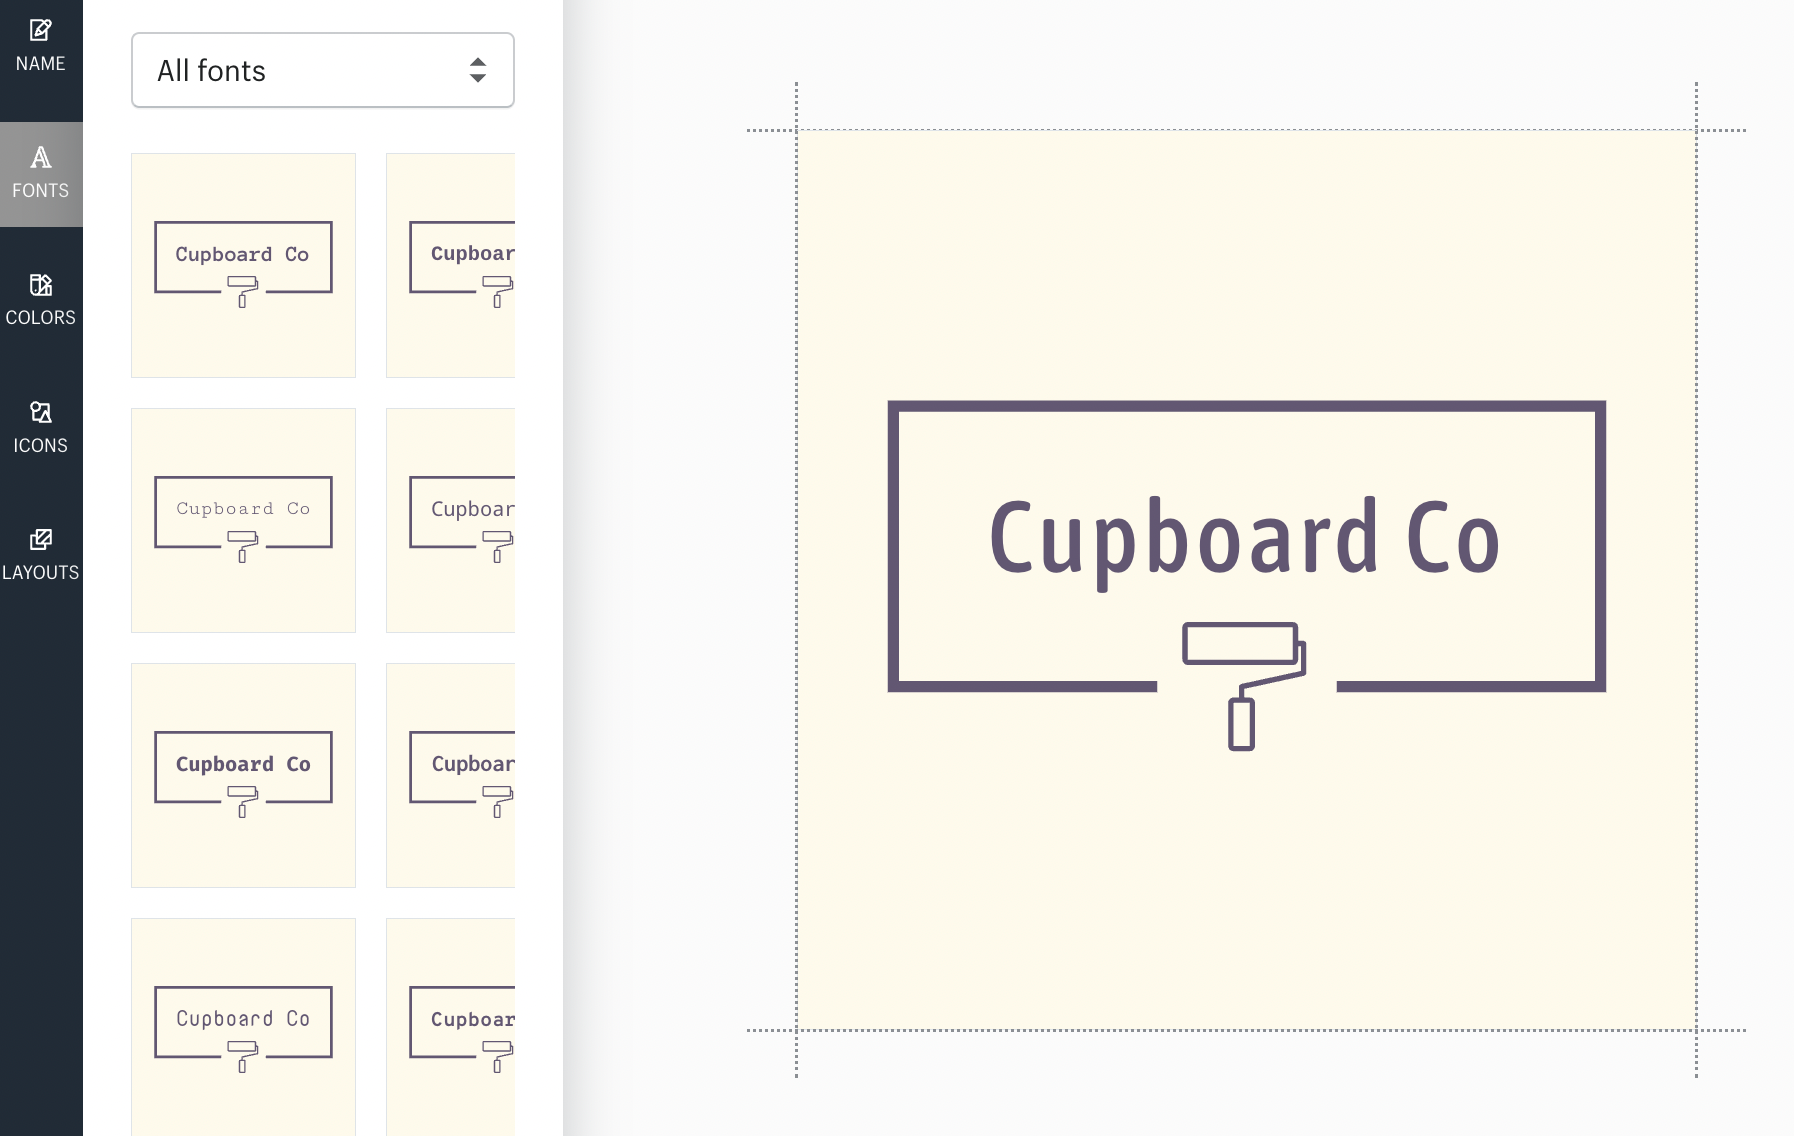 The editing dashboard in Shopify’s free logo maker, where you can change the font, colors, and icons.